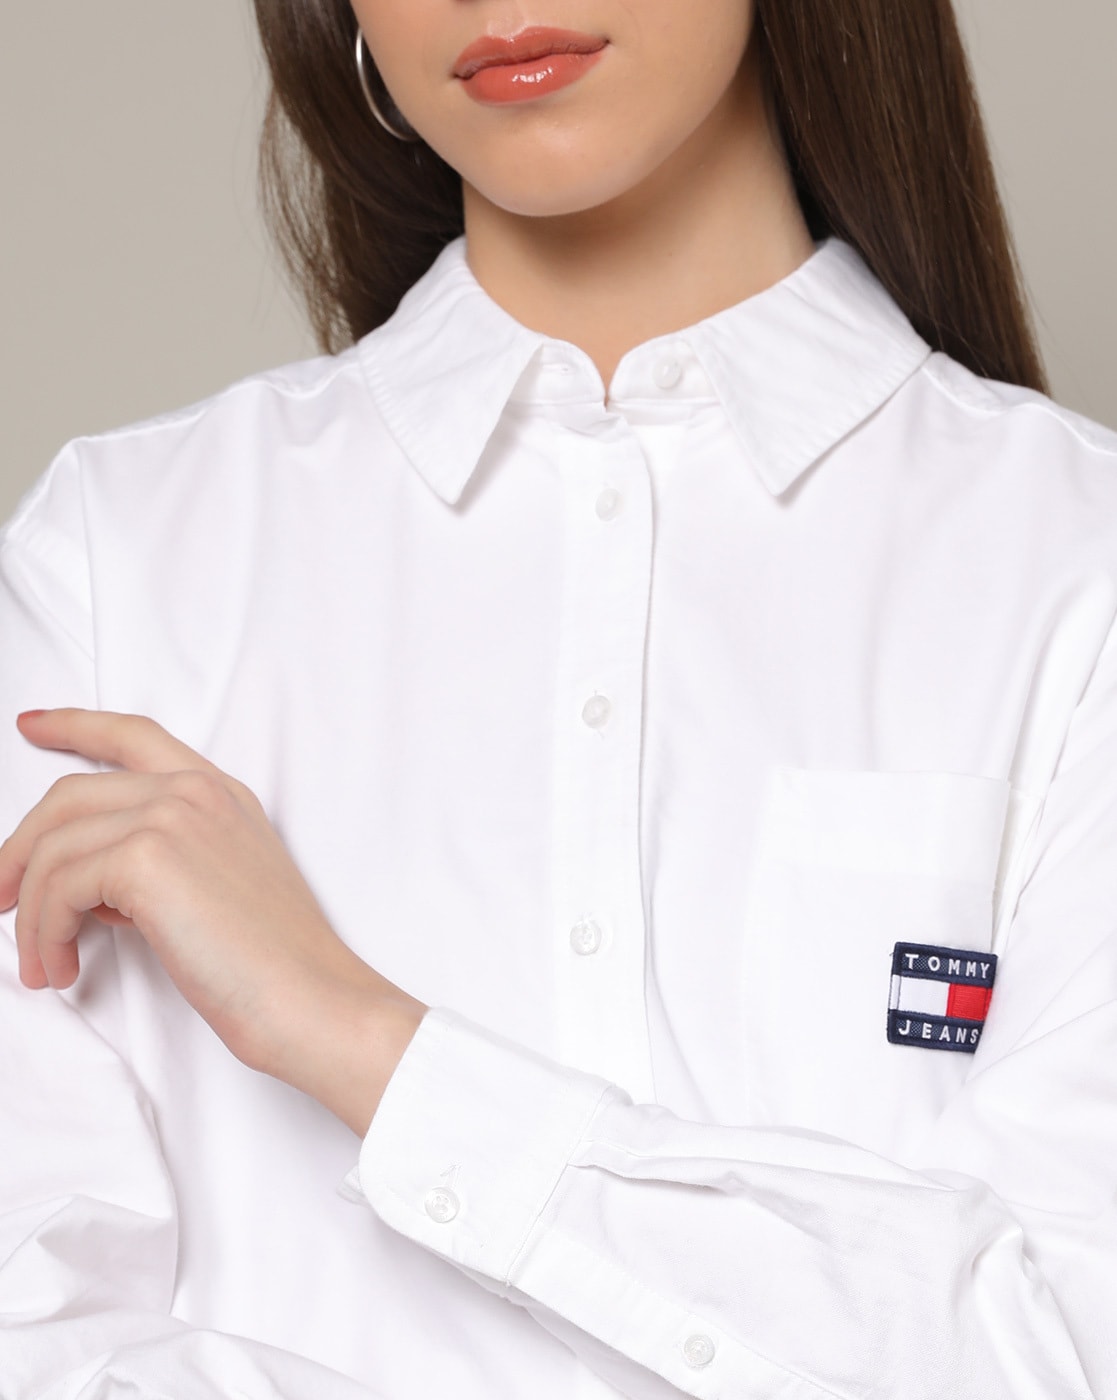 Buy White Shirts for Women Online TOMMY by HILFIGER